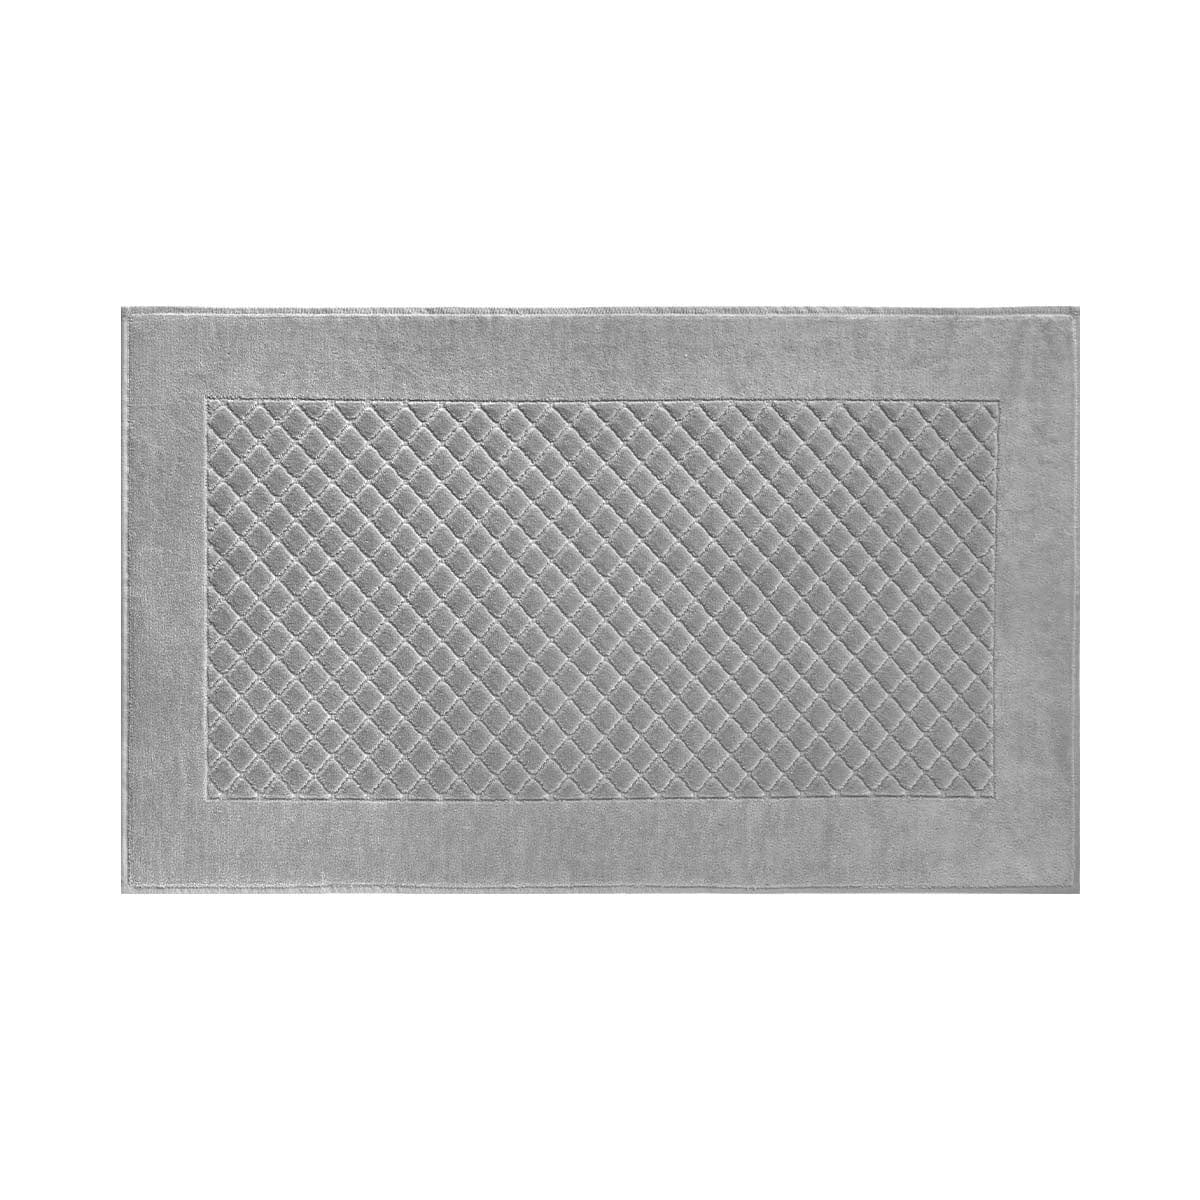 Mats & Rugs Etoile Bath Mat by Yves Delorme Yves Delorme